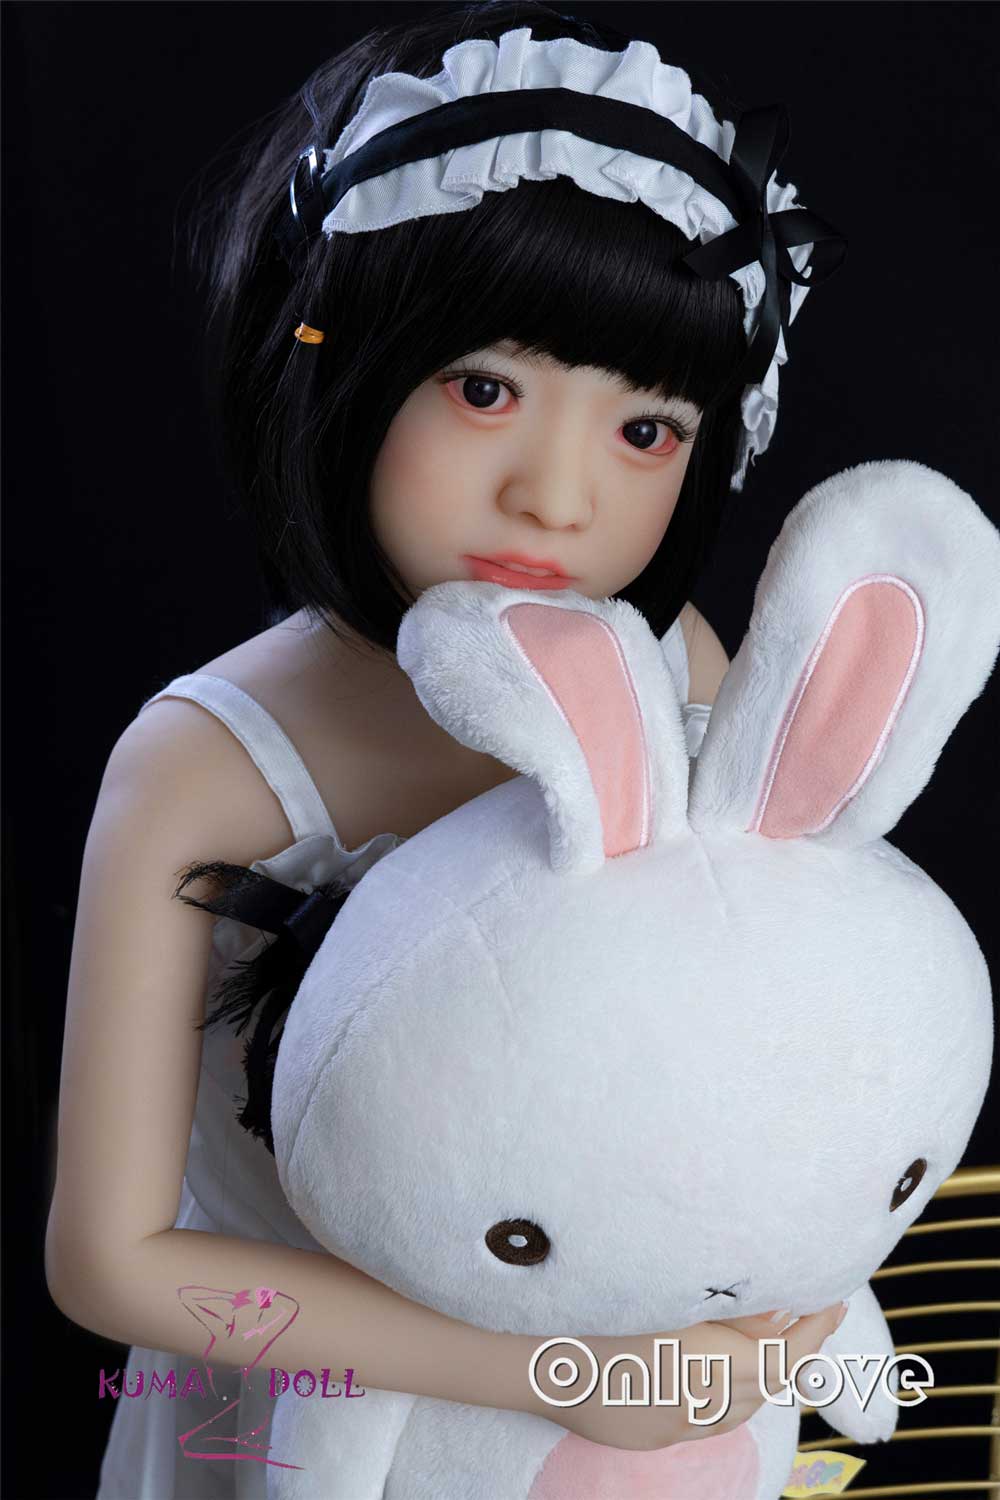 Only Love Roli #G4ヘッド TPE Love Doll 128cm Small Tits Head Craftsman Makeup as shown in the image is free standard equipment